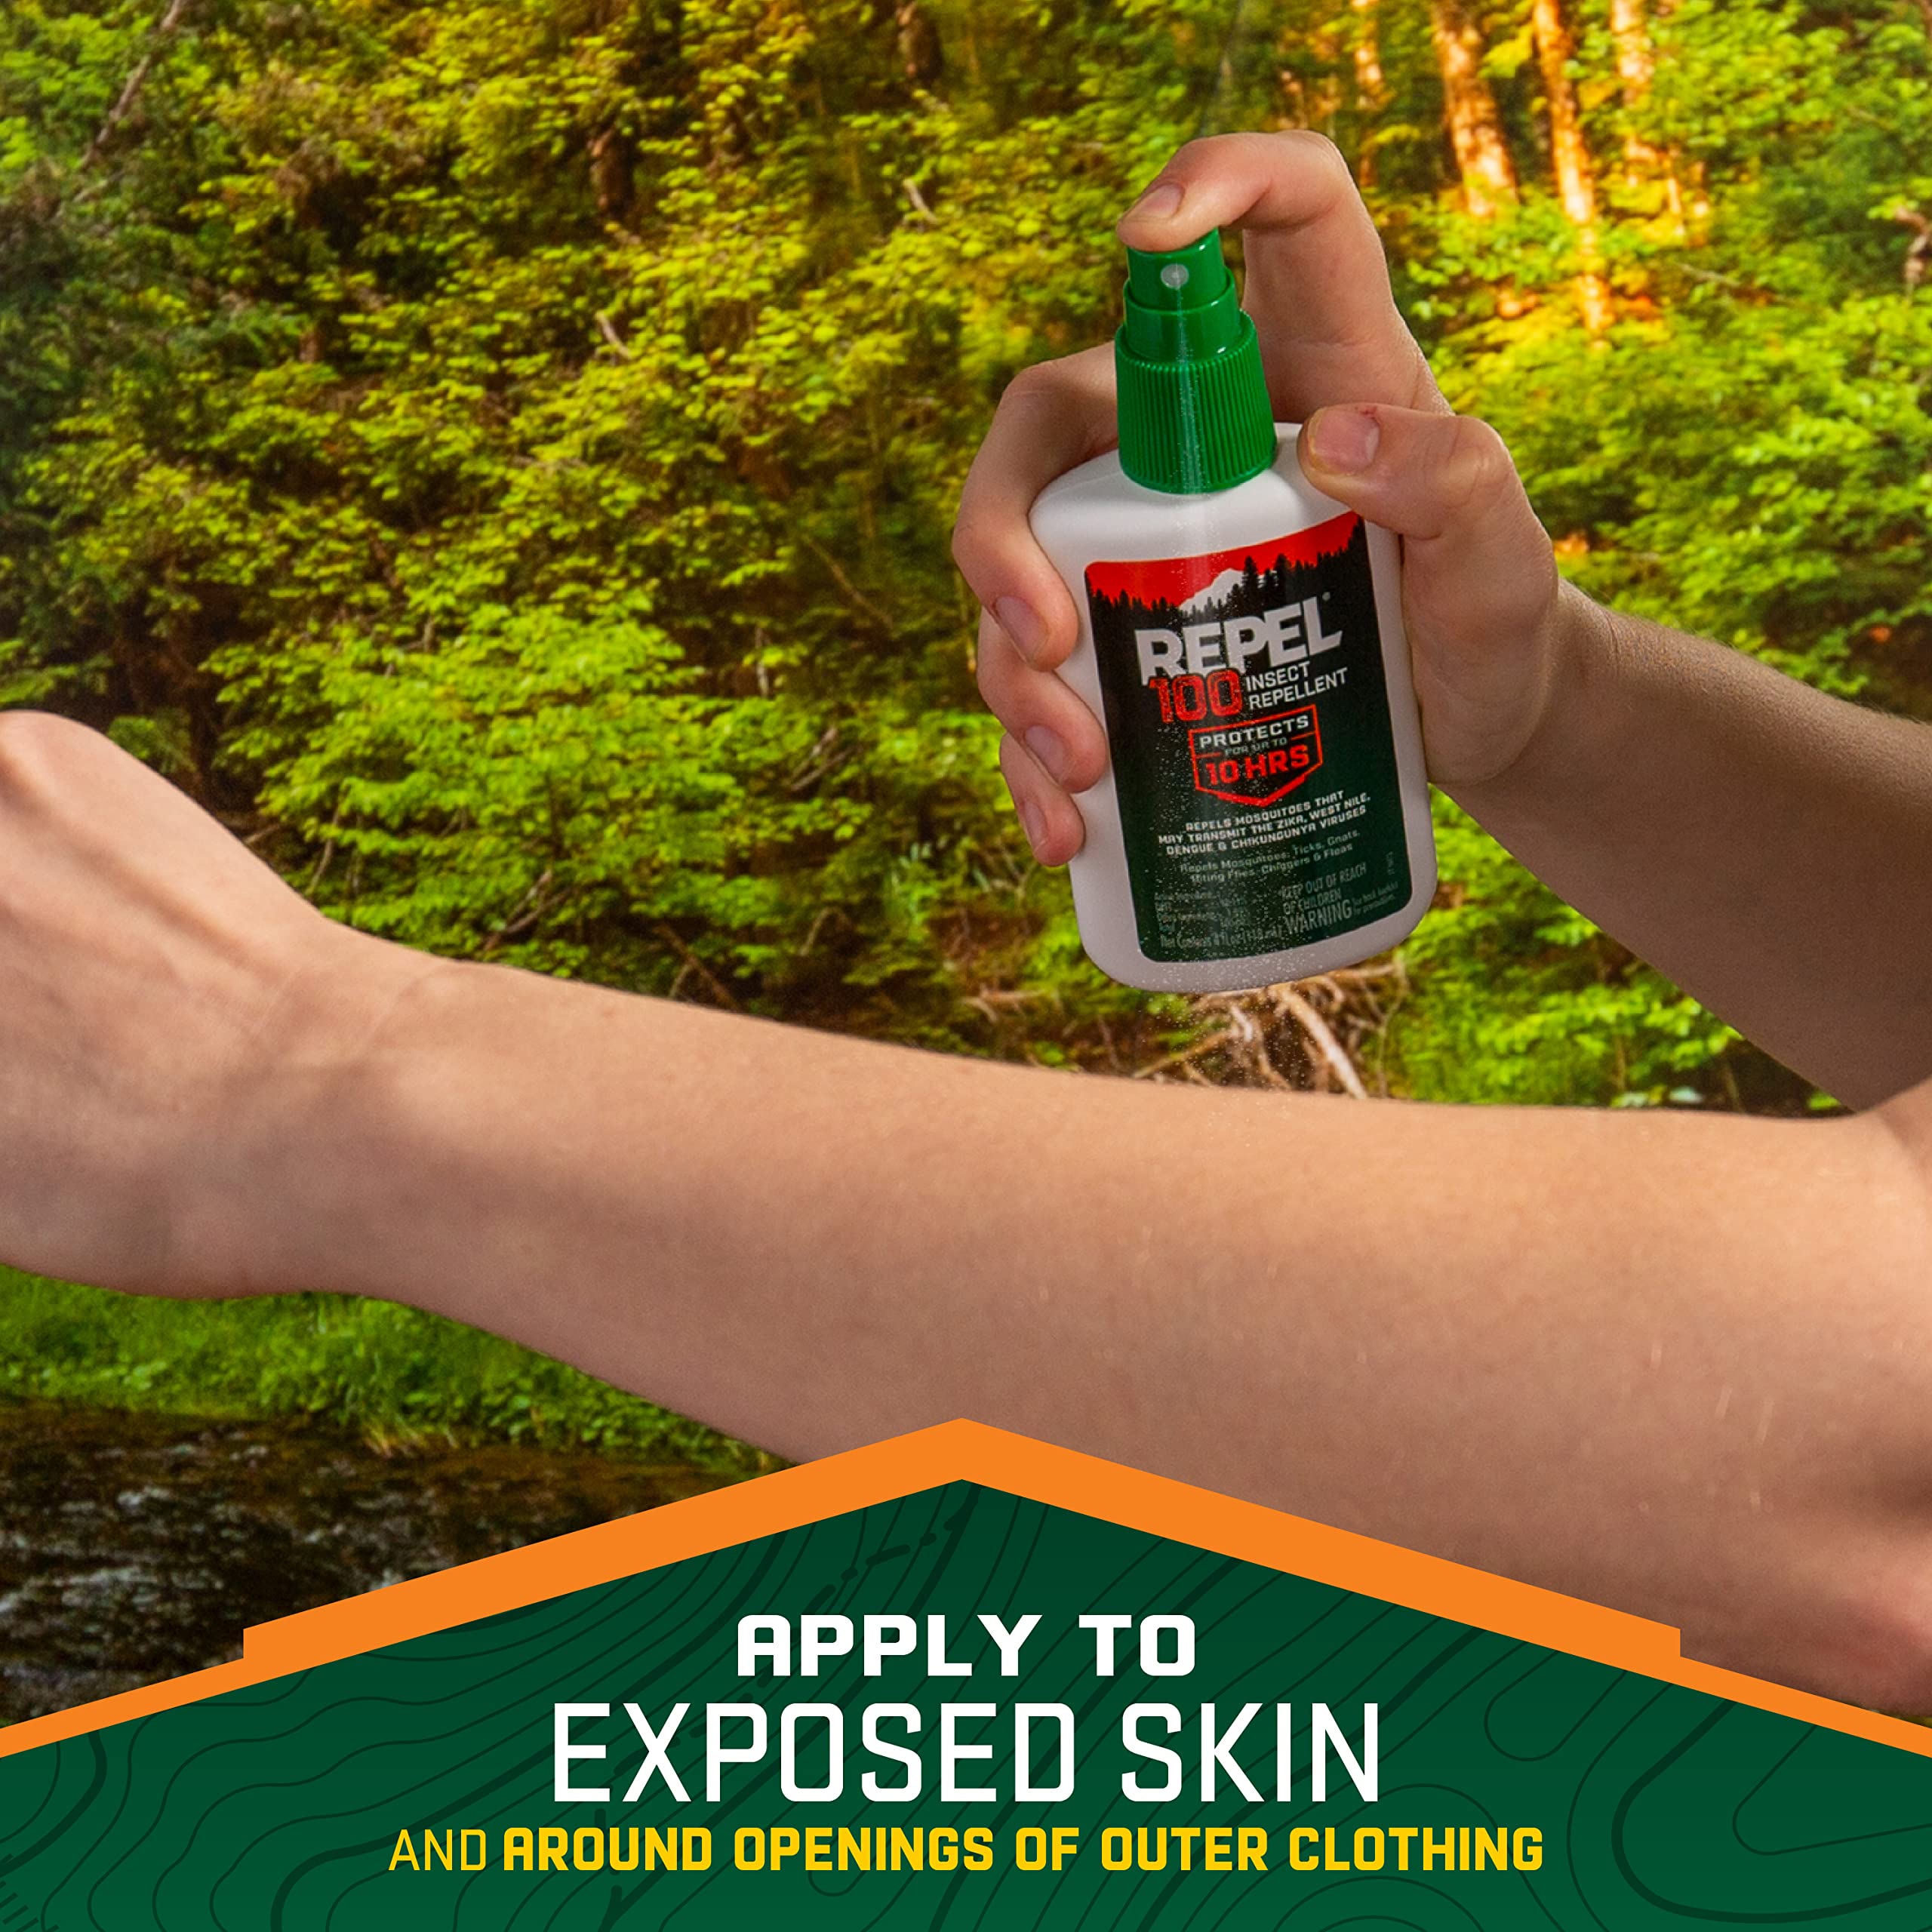 Repel 100 Insect Repellent Pump Spray - 98.11% DEET, 4 oz - Up to 10 Hours Protection